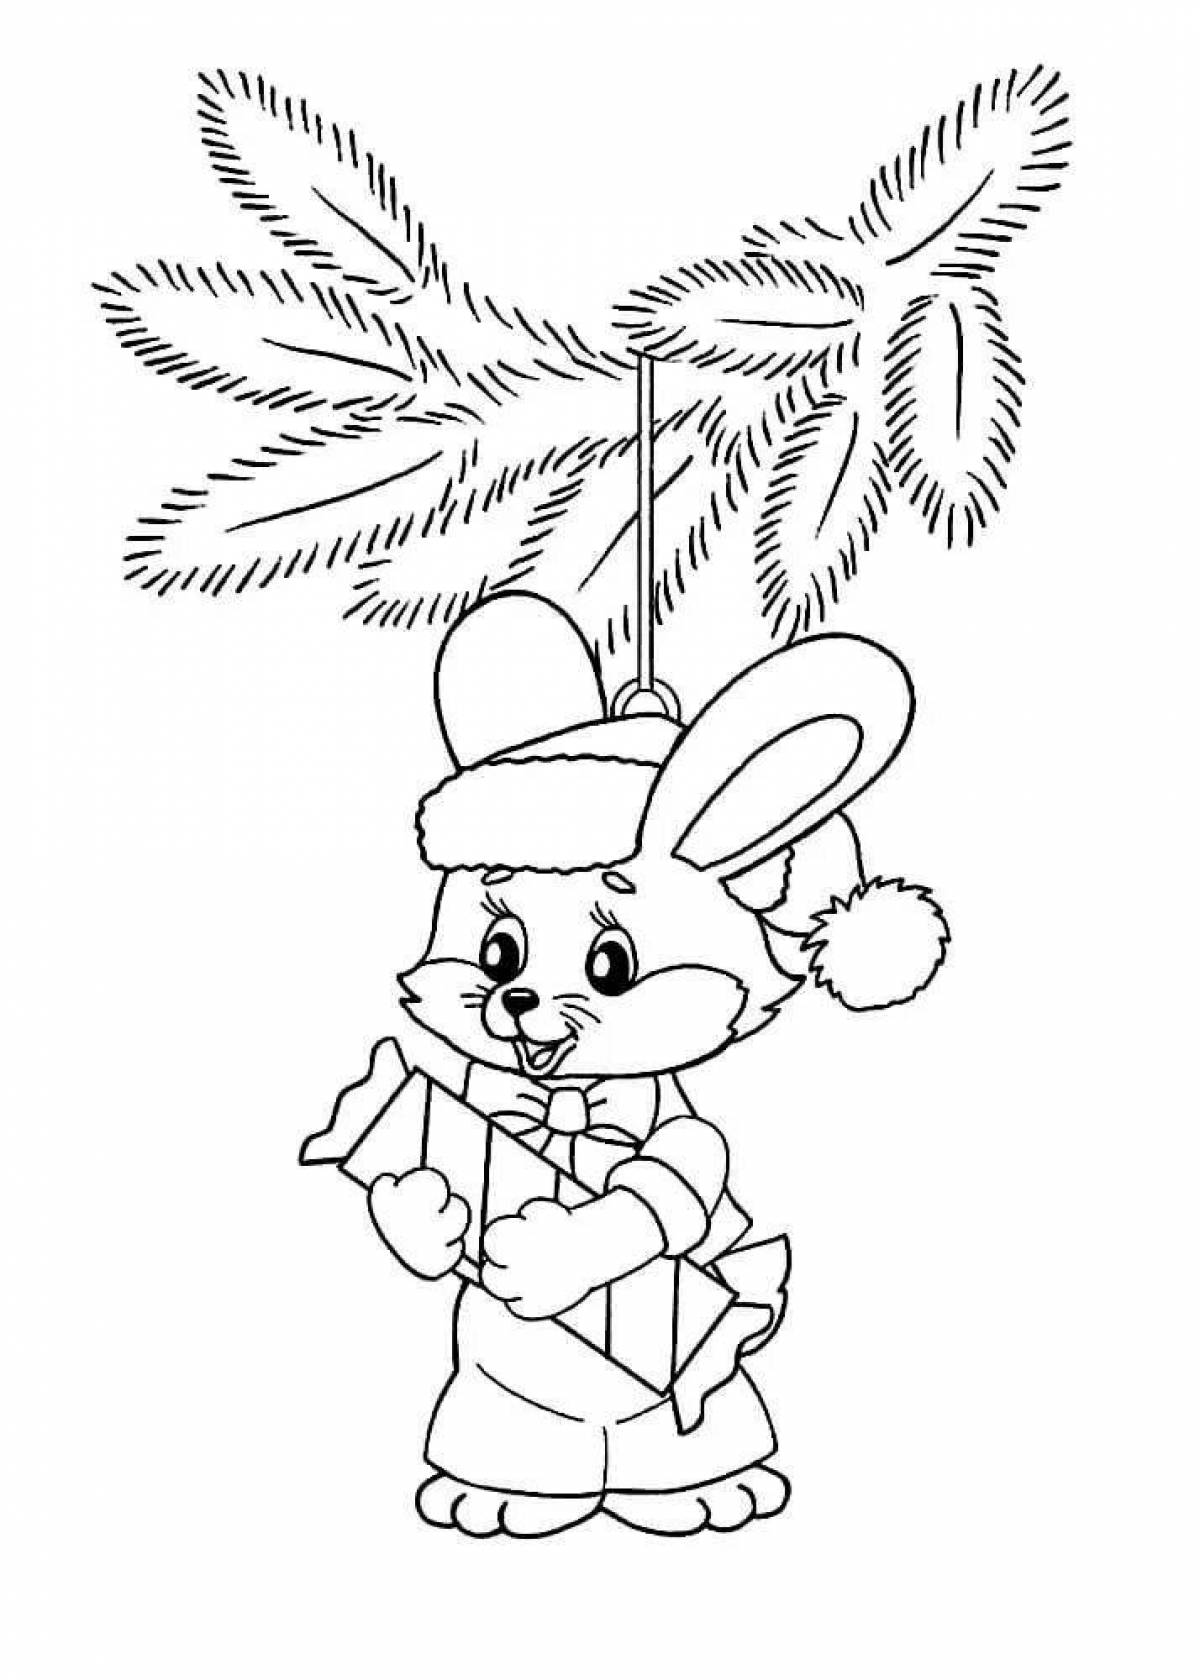 Coloring page merry christmas tree and rabbit